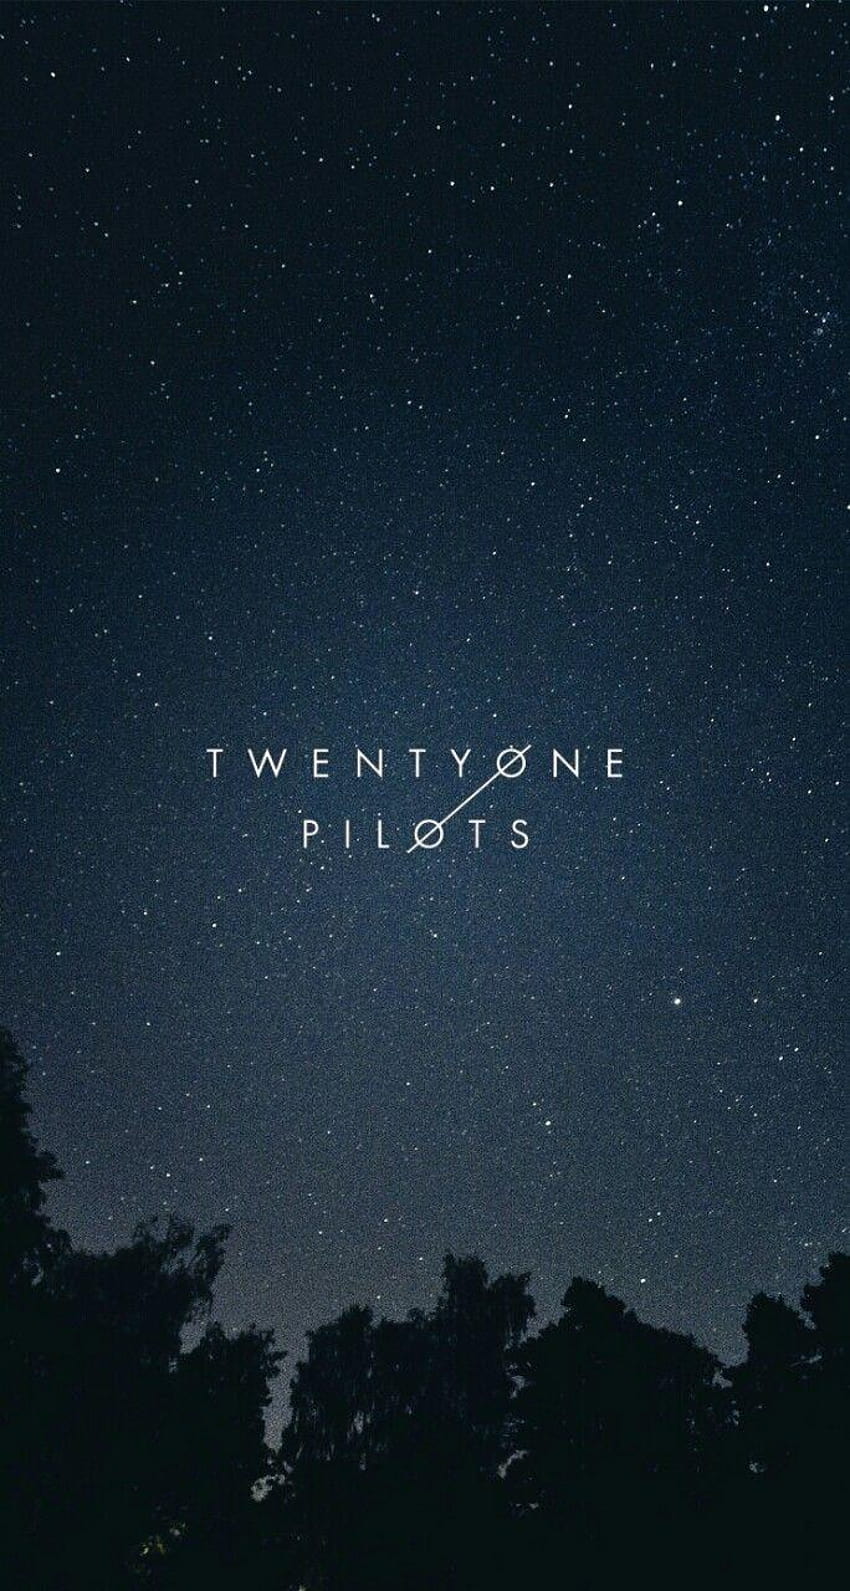 Used to dream of outer space but now they're laughing at our face, twenty one pilots trench HD phone wallpaper